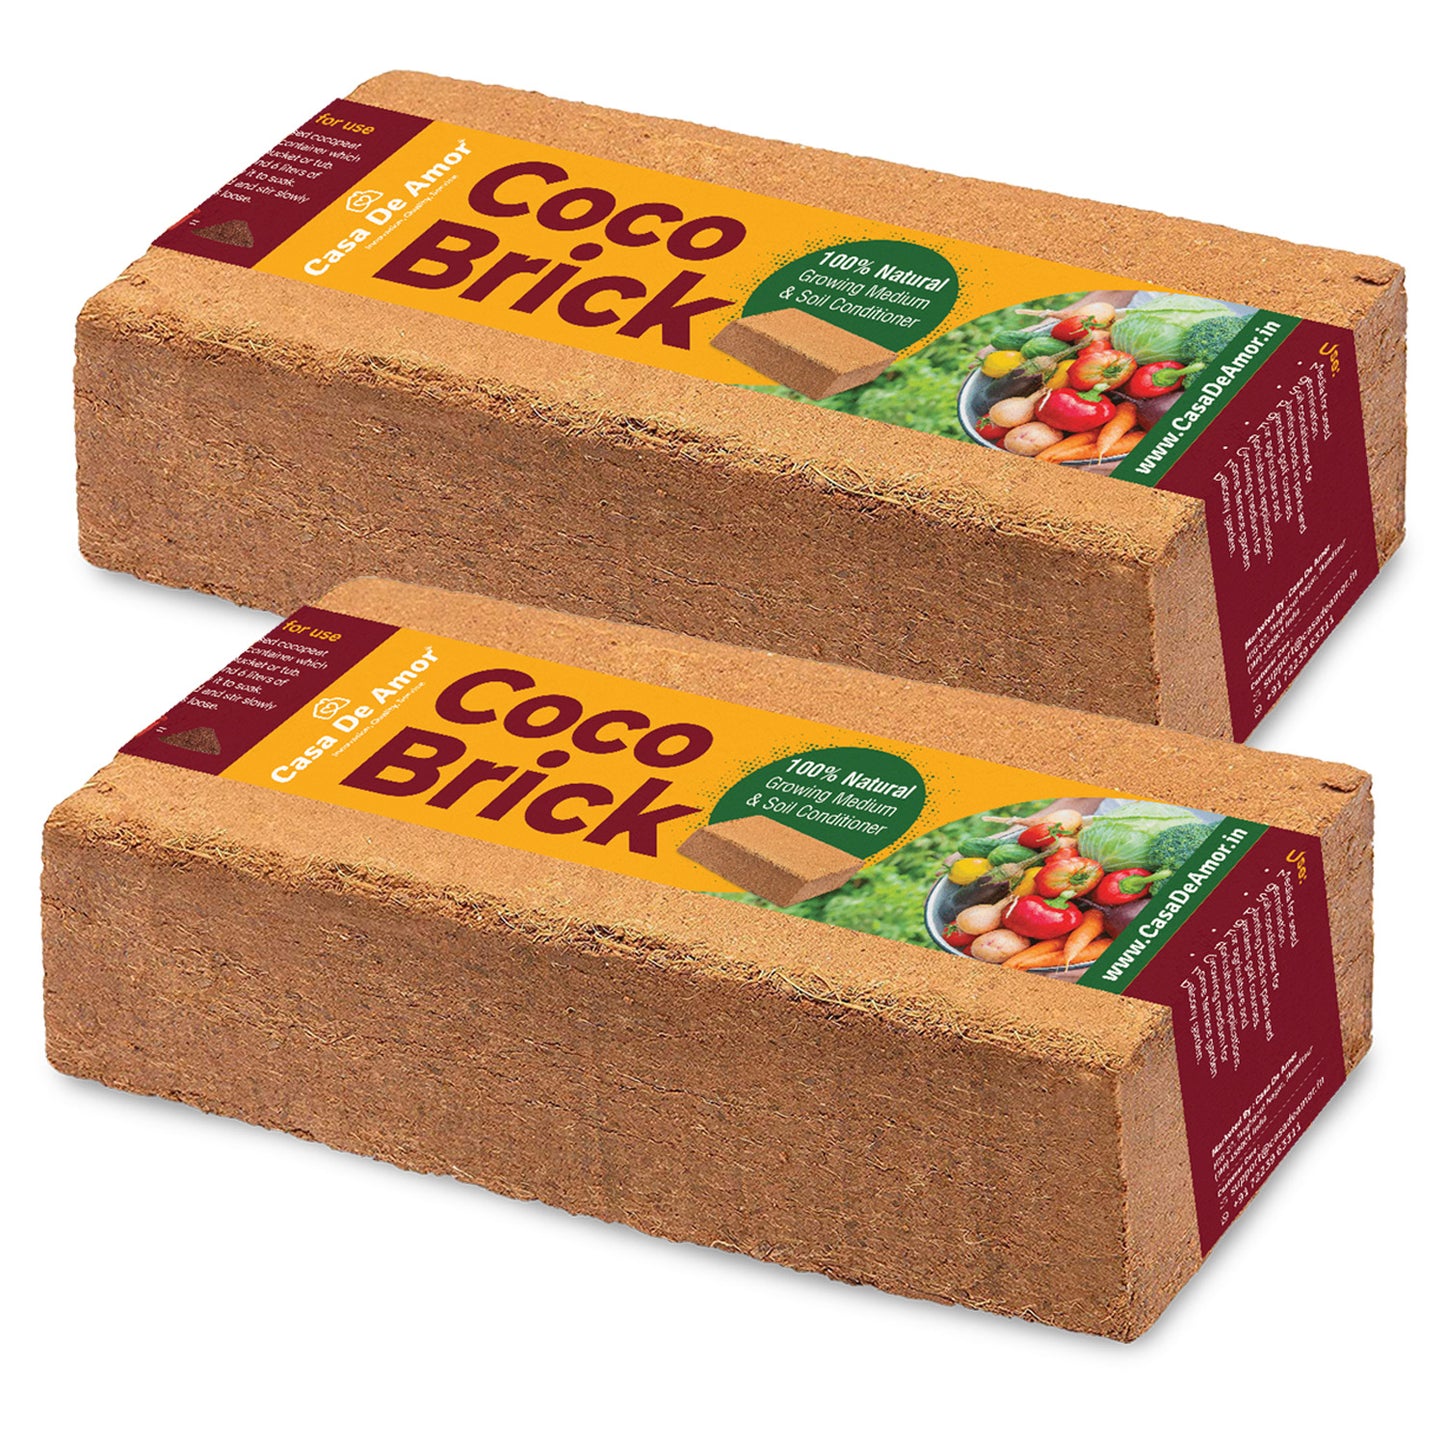 Casa De Amor Cocopeat Brick (650gm) High Water-Holding Capacity, Expands to 4kg Powder